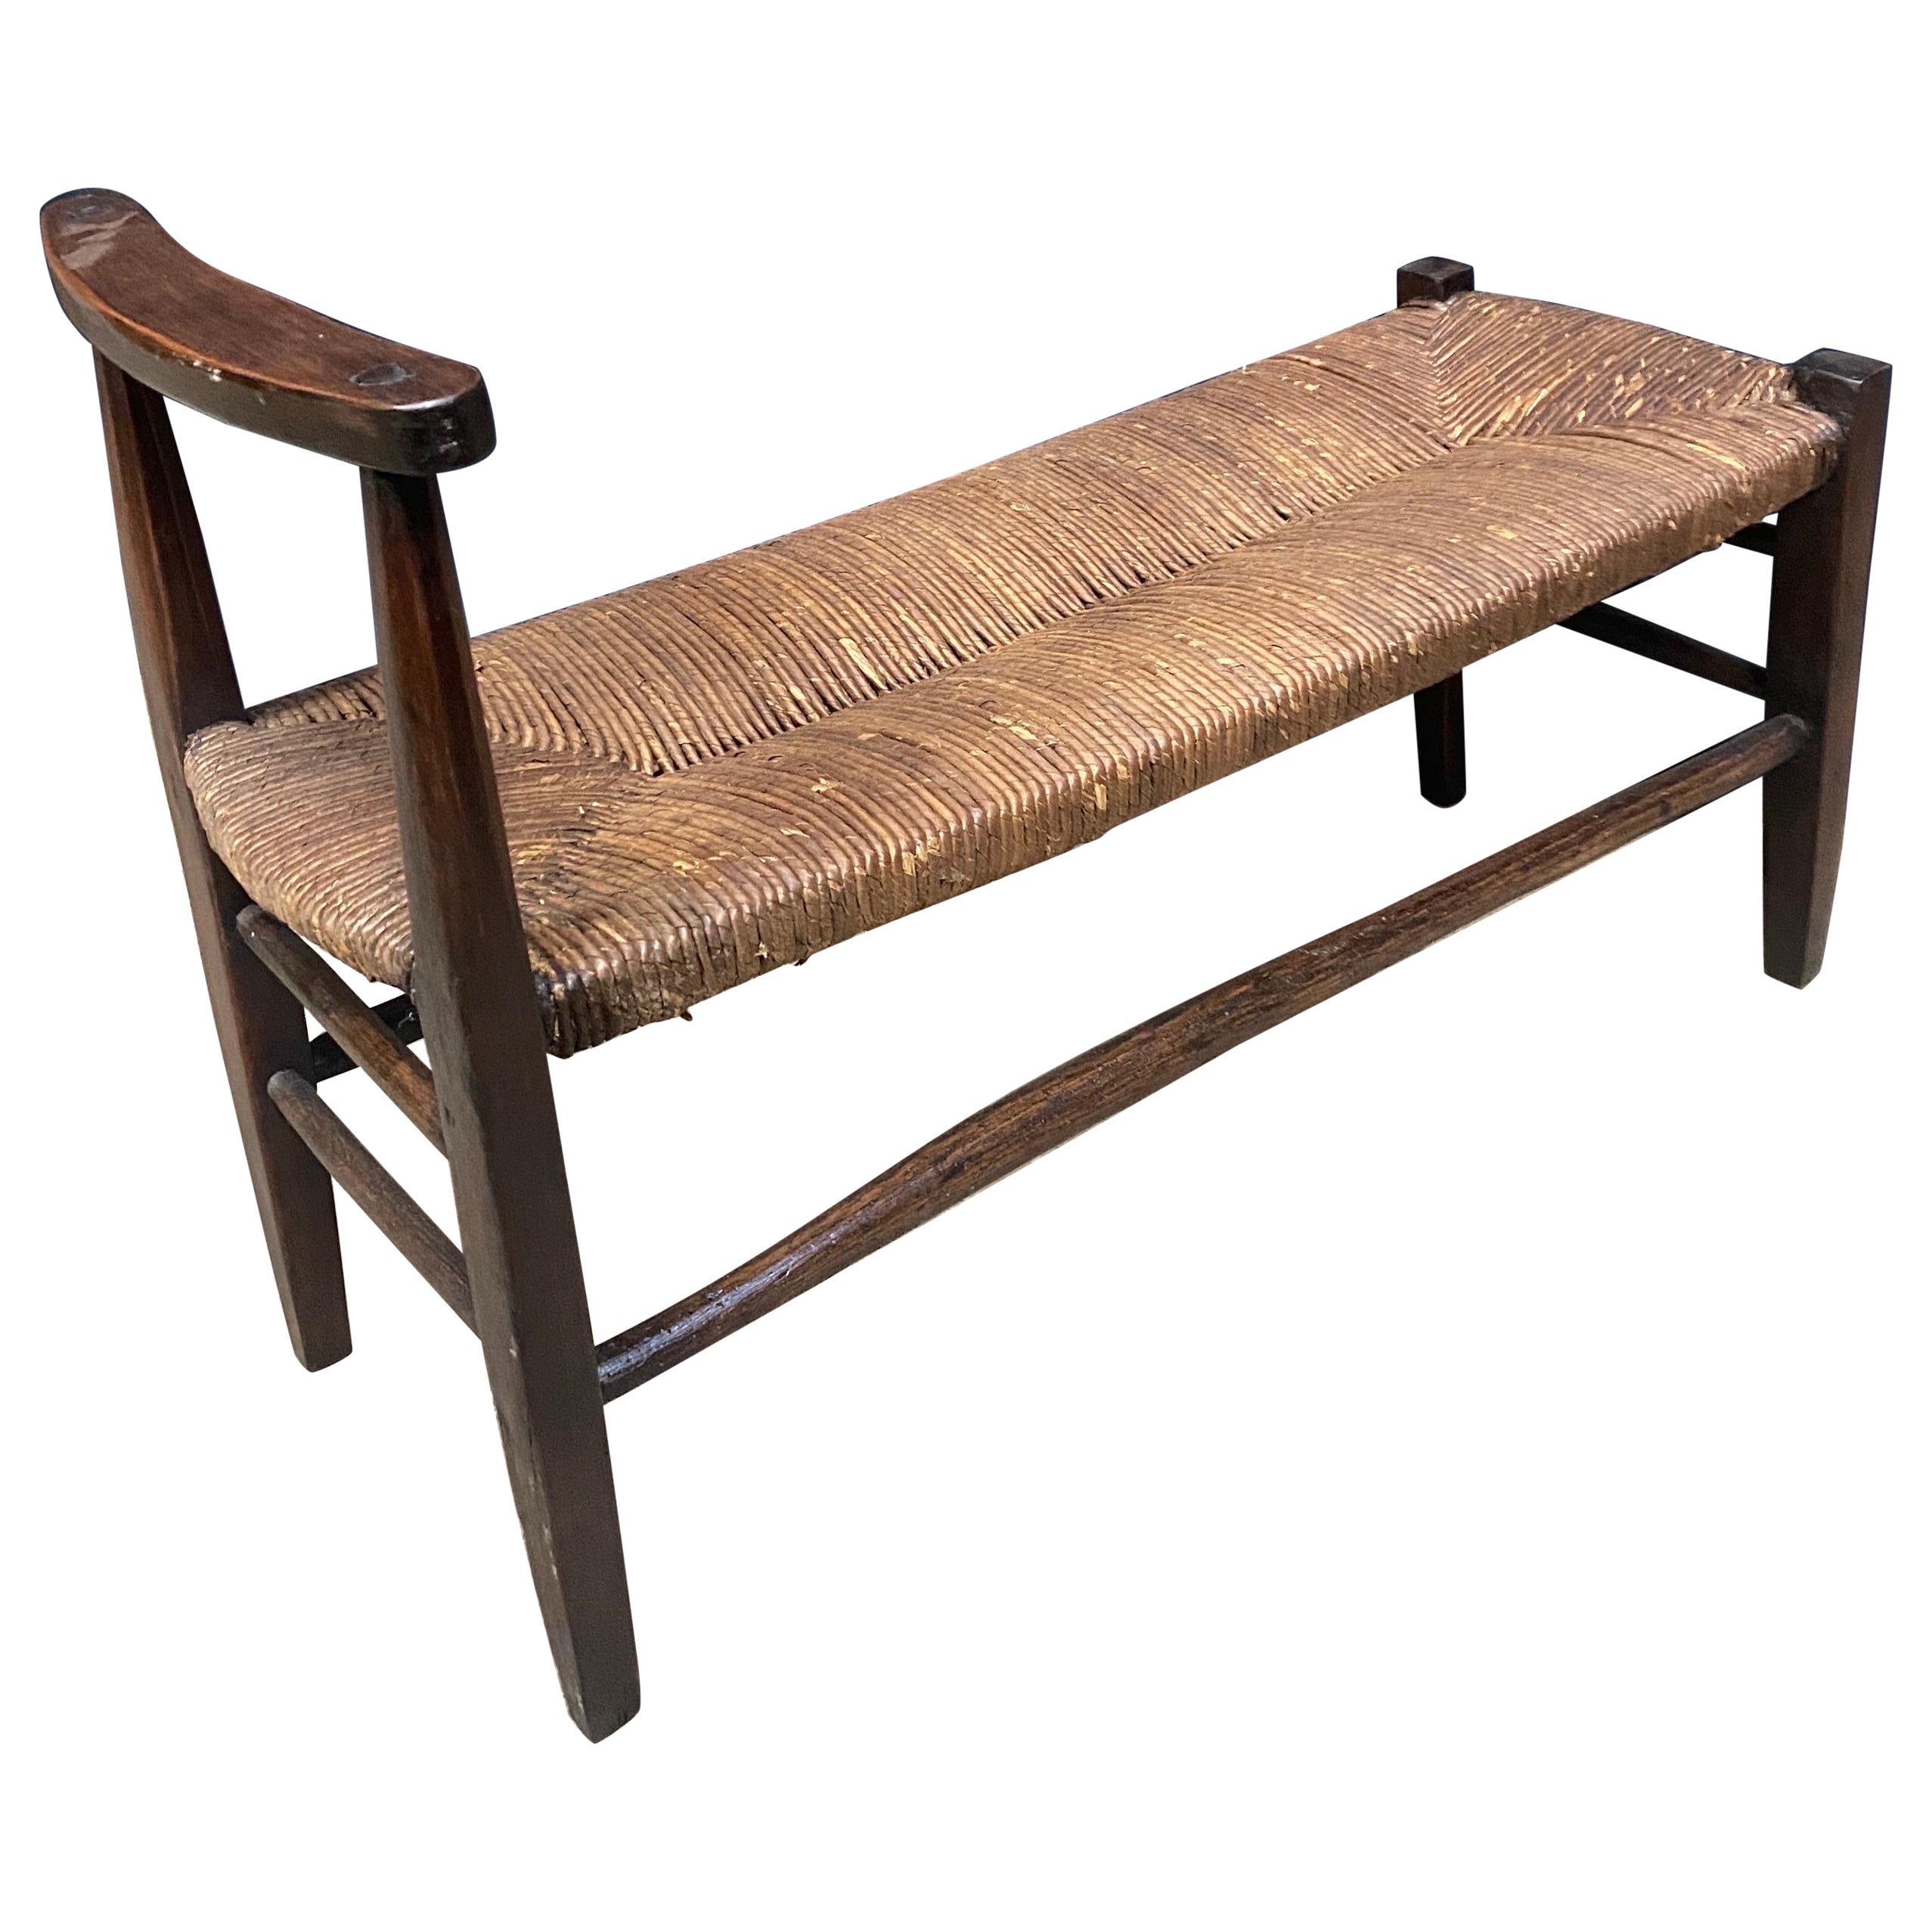 18th century fireplace bench ( cantou) For Sale